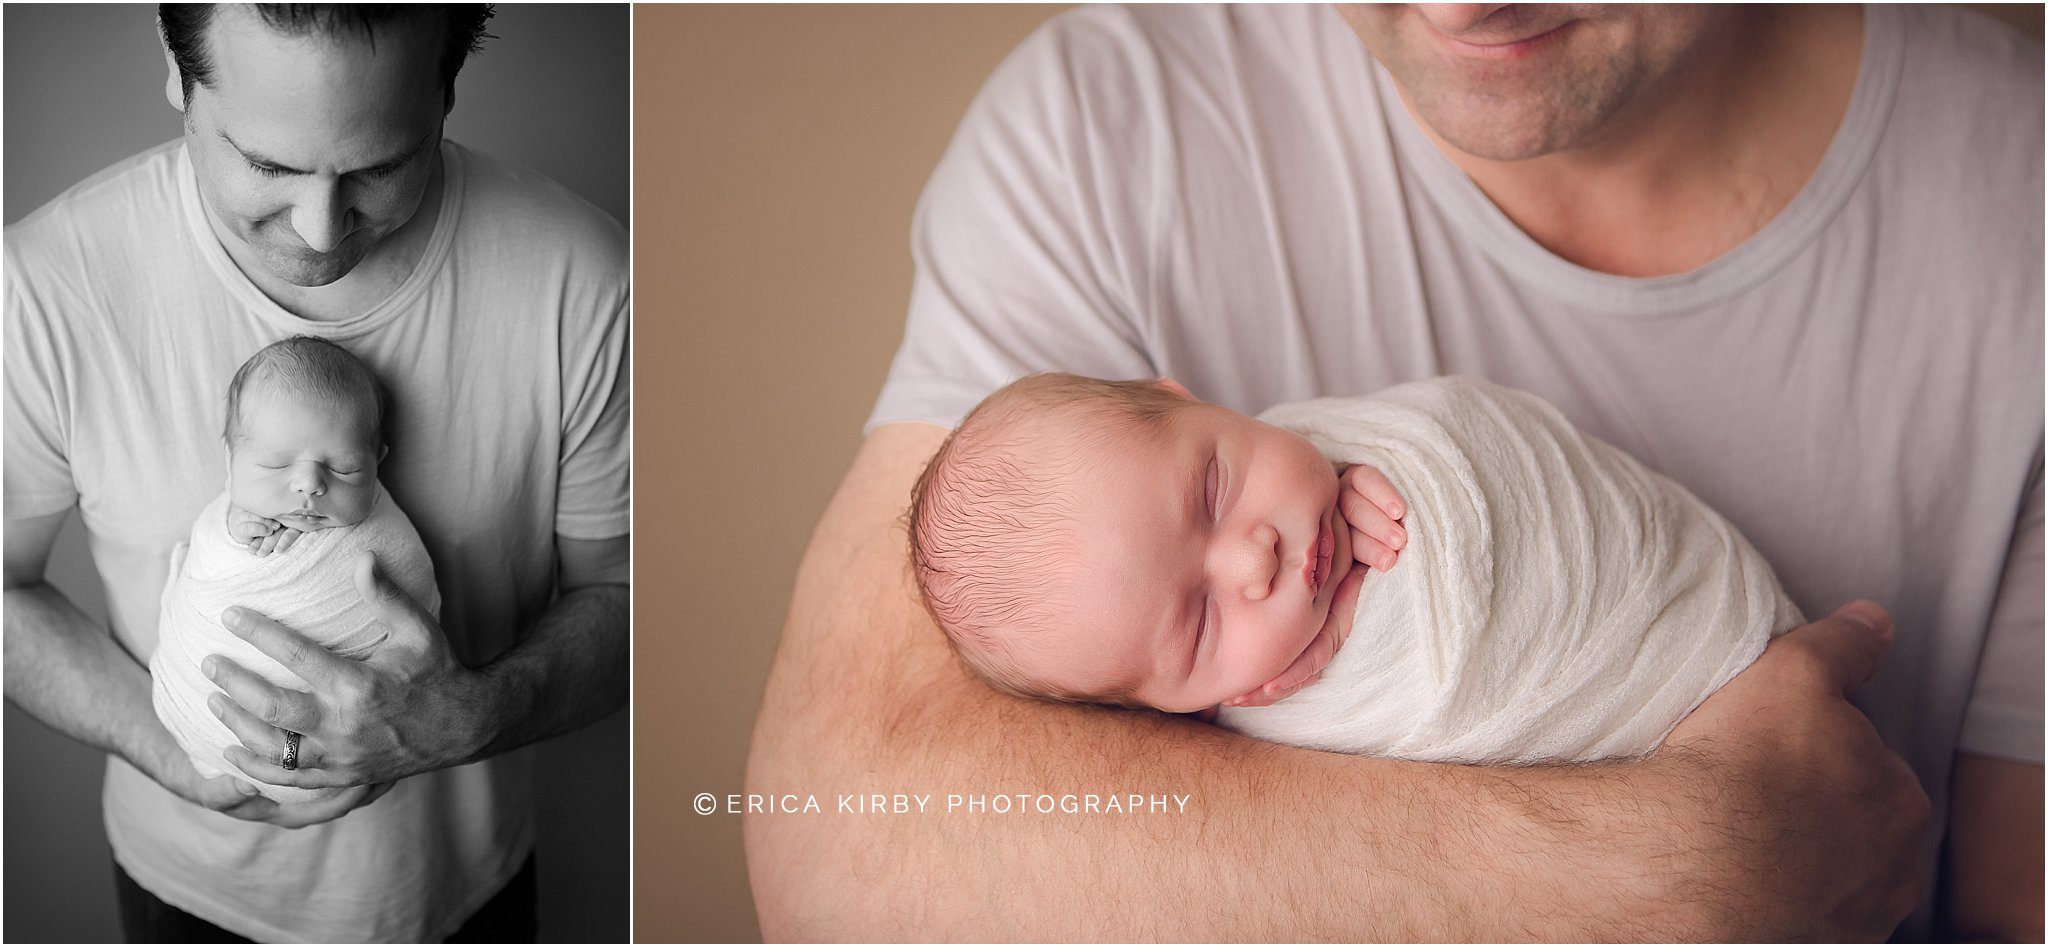 Newborn Photographers NW Arkansas - Soft and timeless newborn baby boy photo session with neutral colors - best newborn baby photographer in Arkansas - erica kirby photography